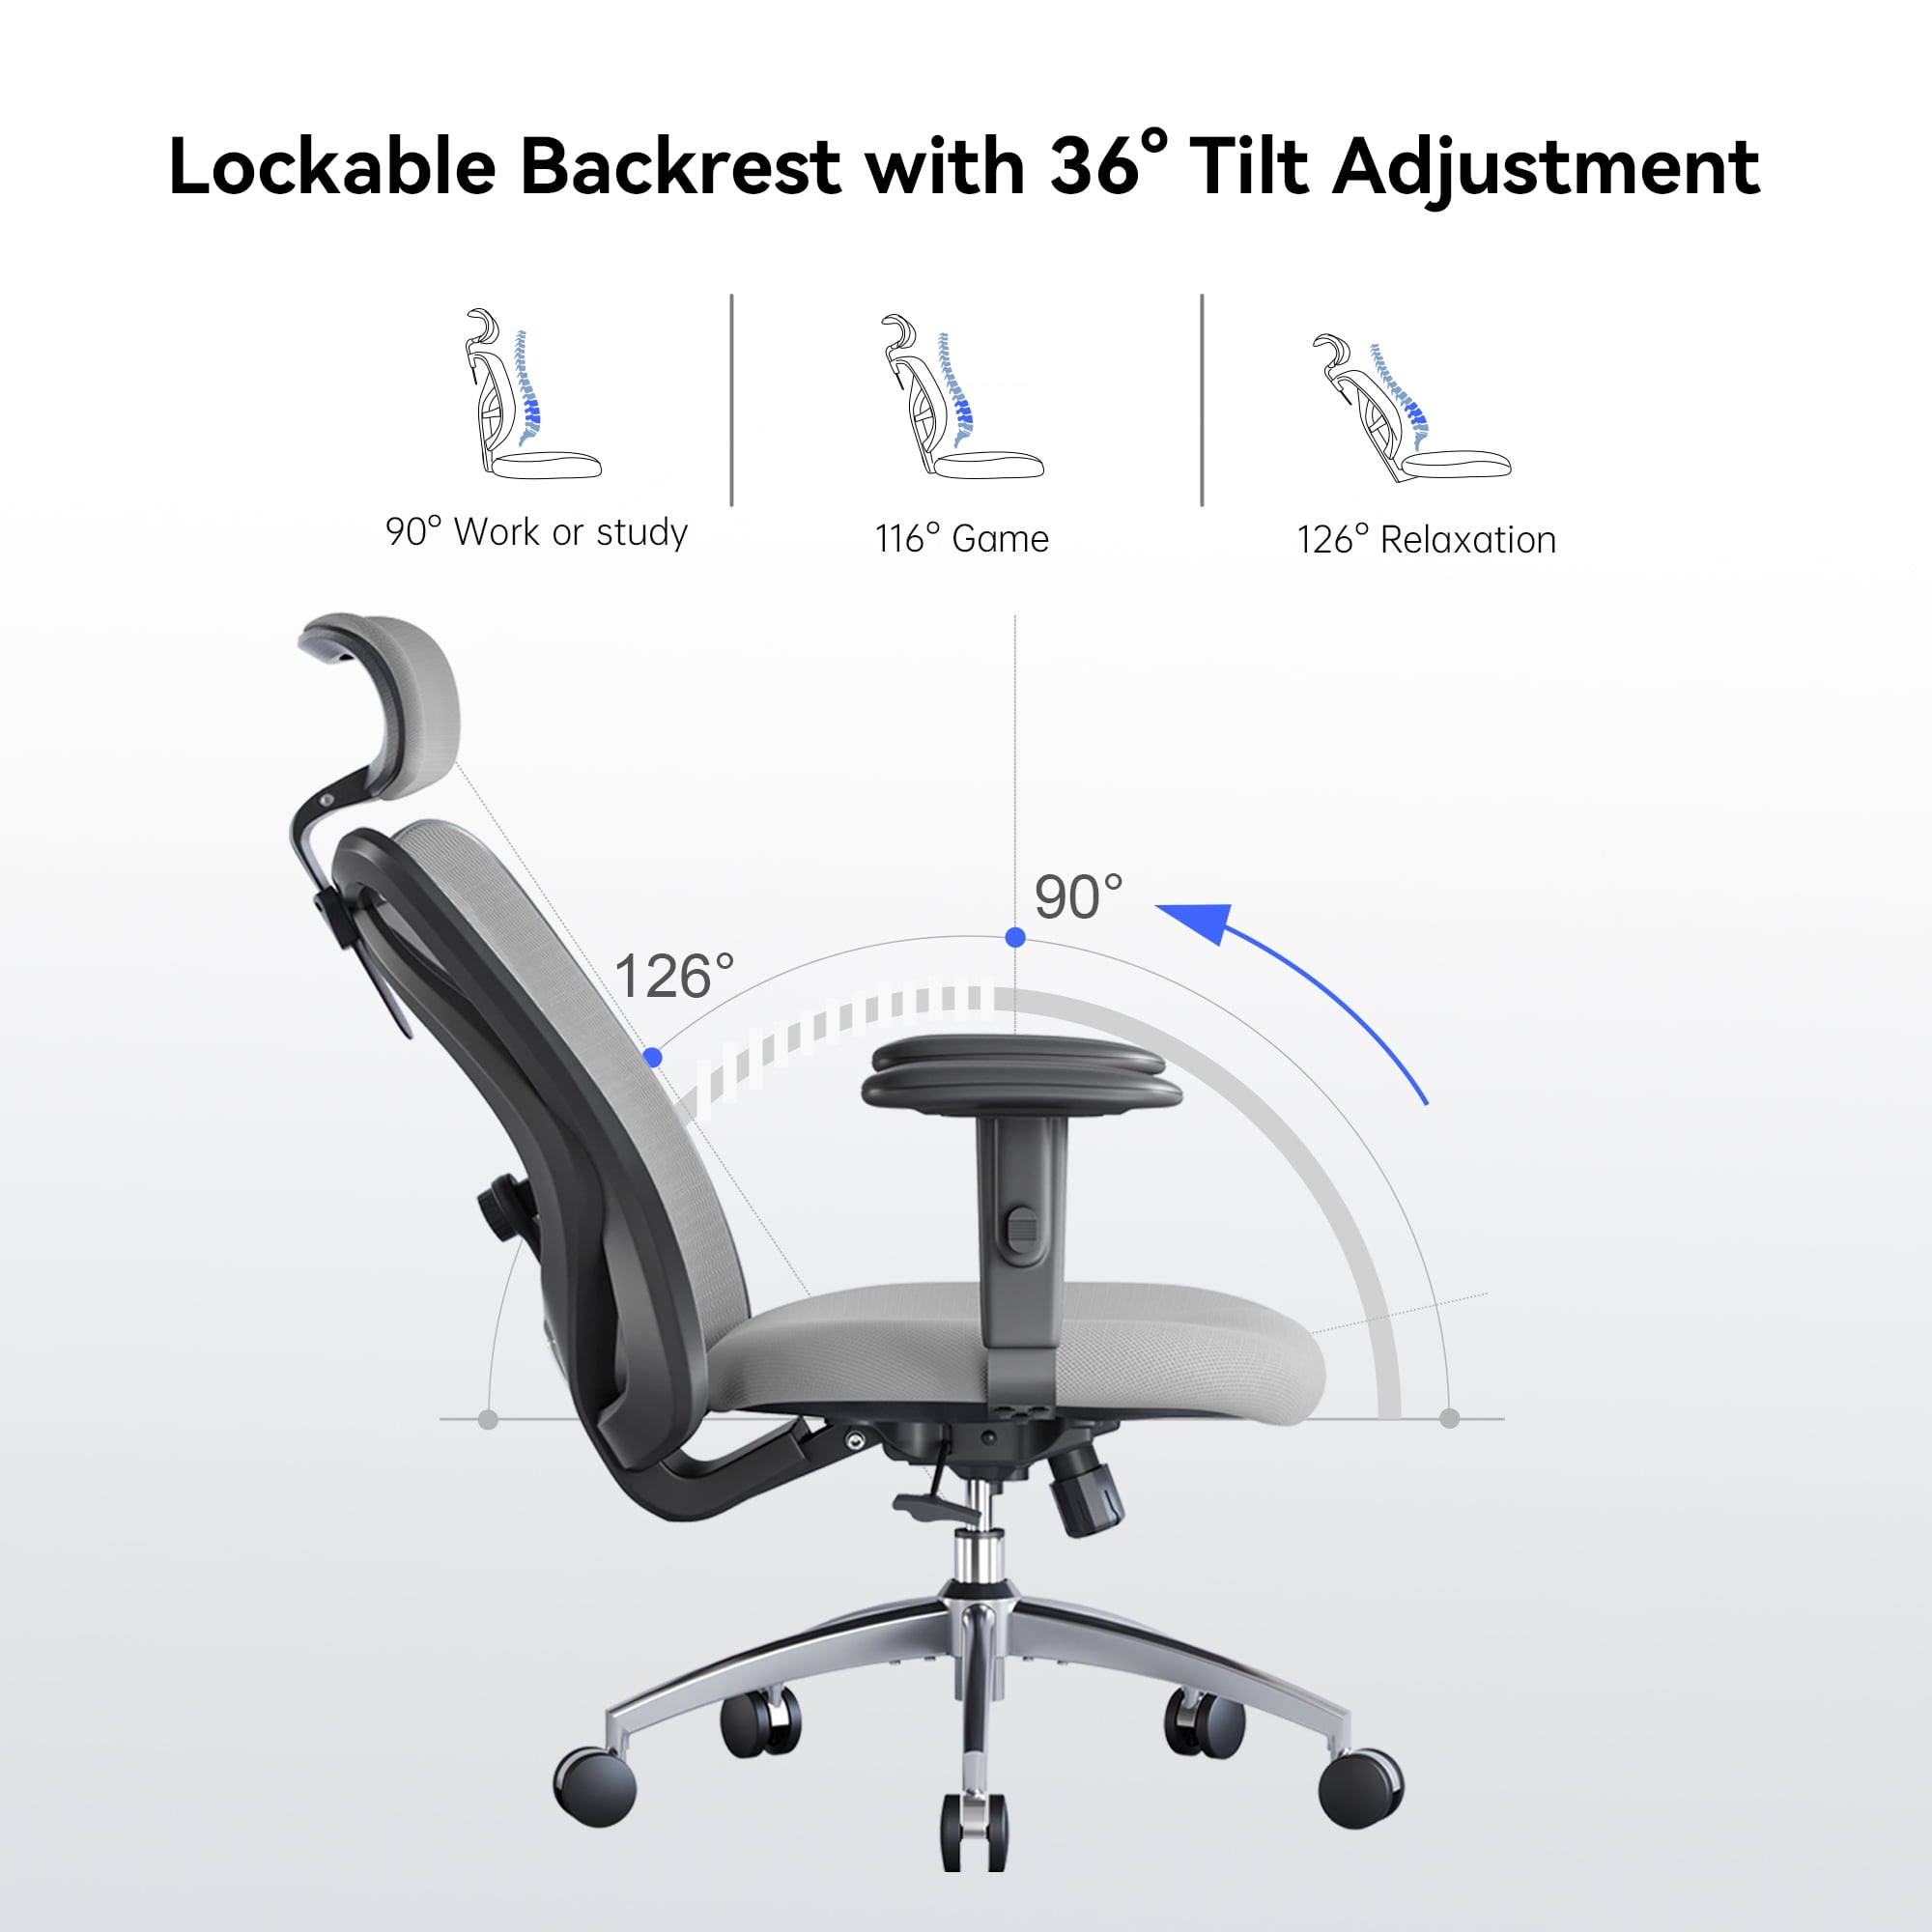 SIHOO M18 Ergonomic Office Chair for Big and Tall People Adjustable  Headrest with 2D Armrest Lumbar Support and PU Wheels Swivel Tilt Function  Black